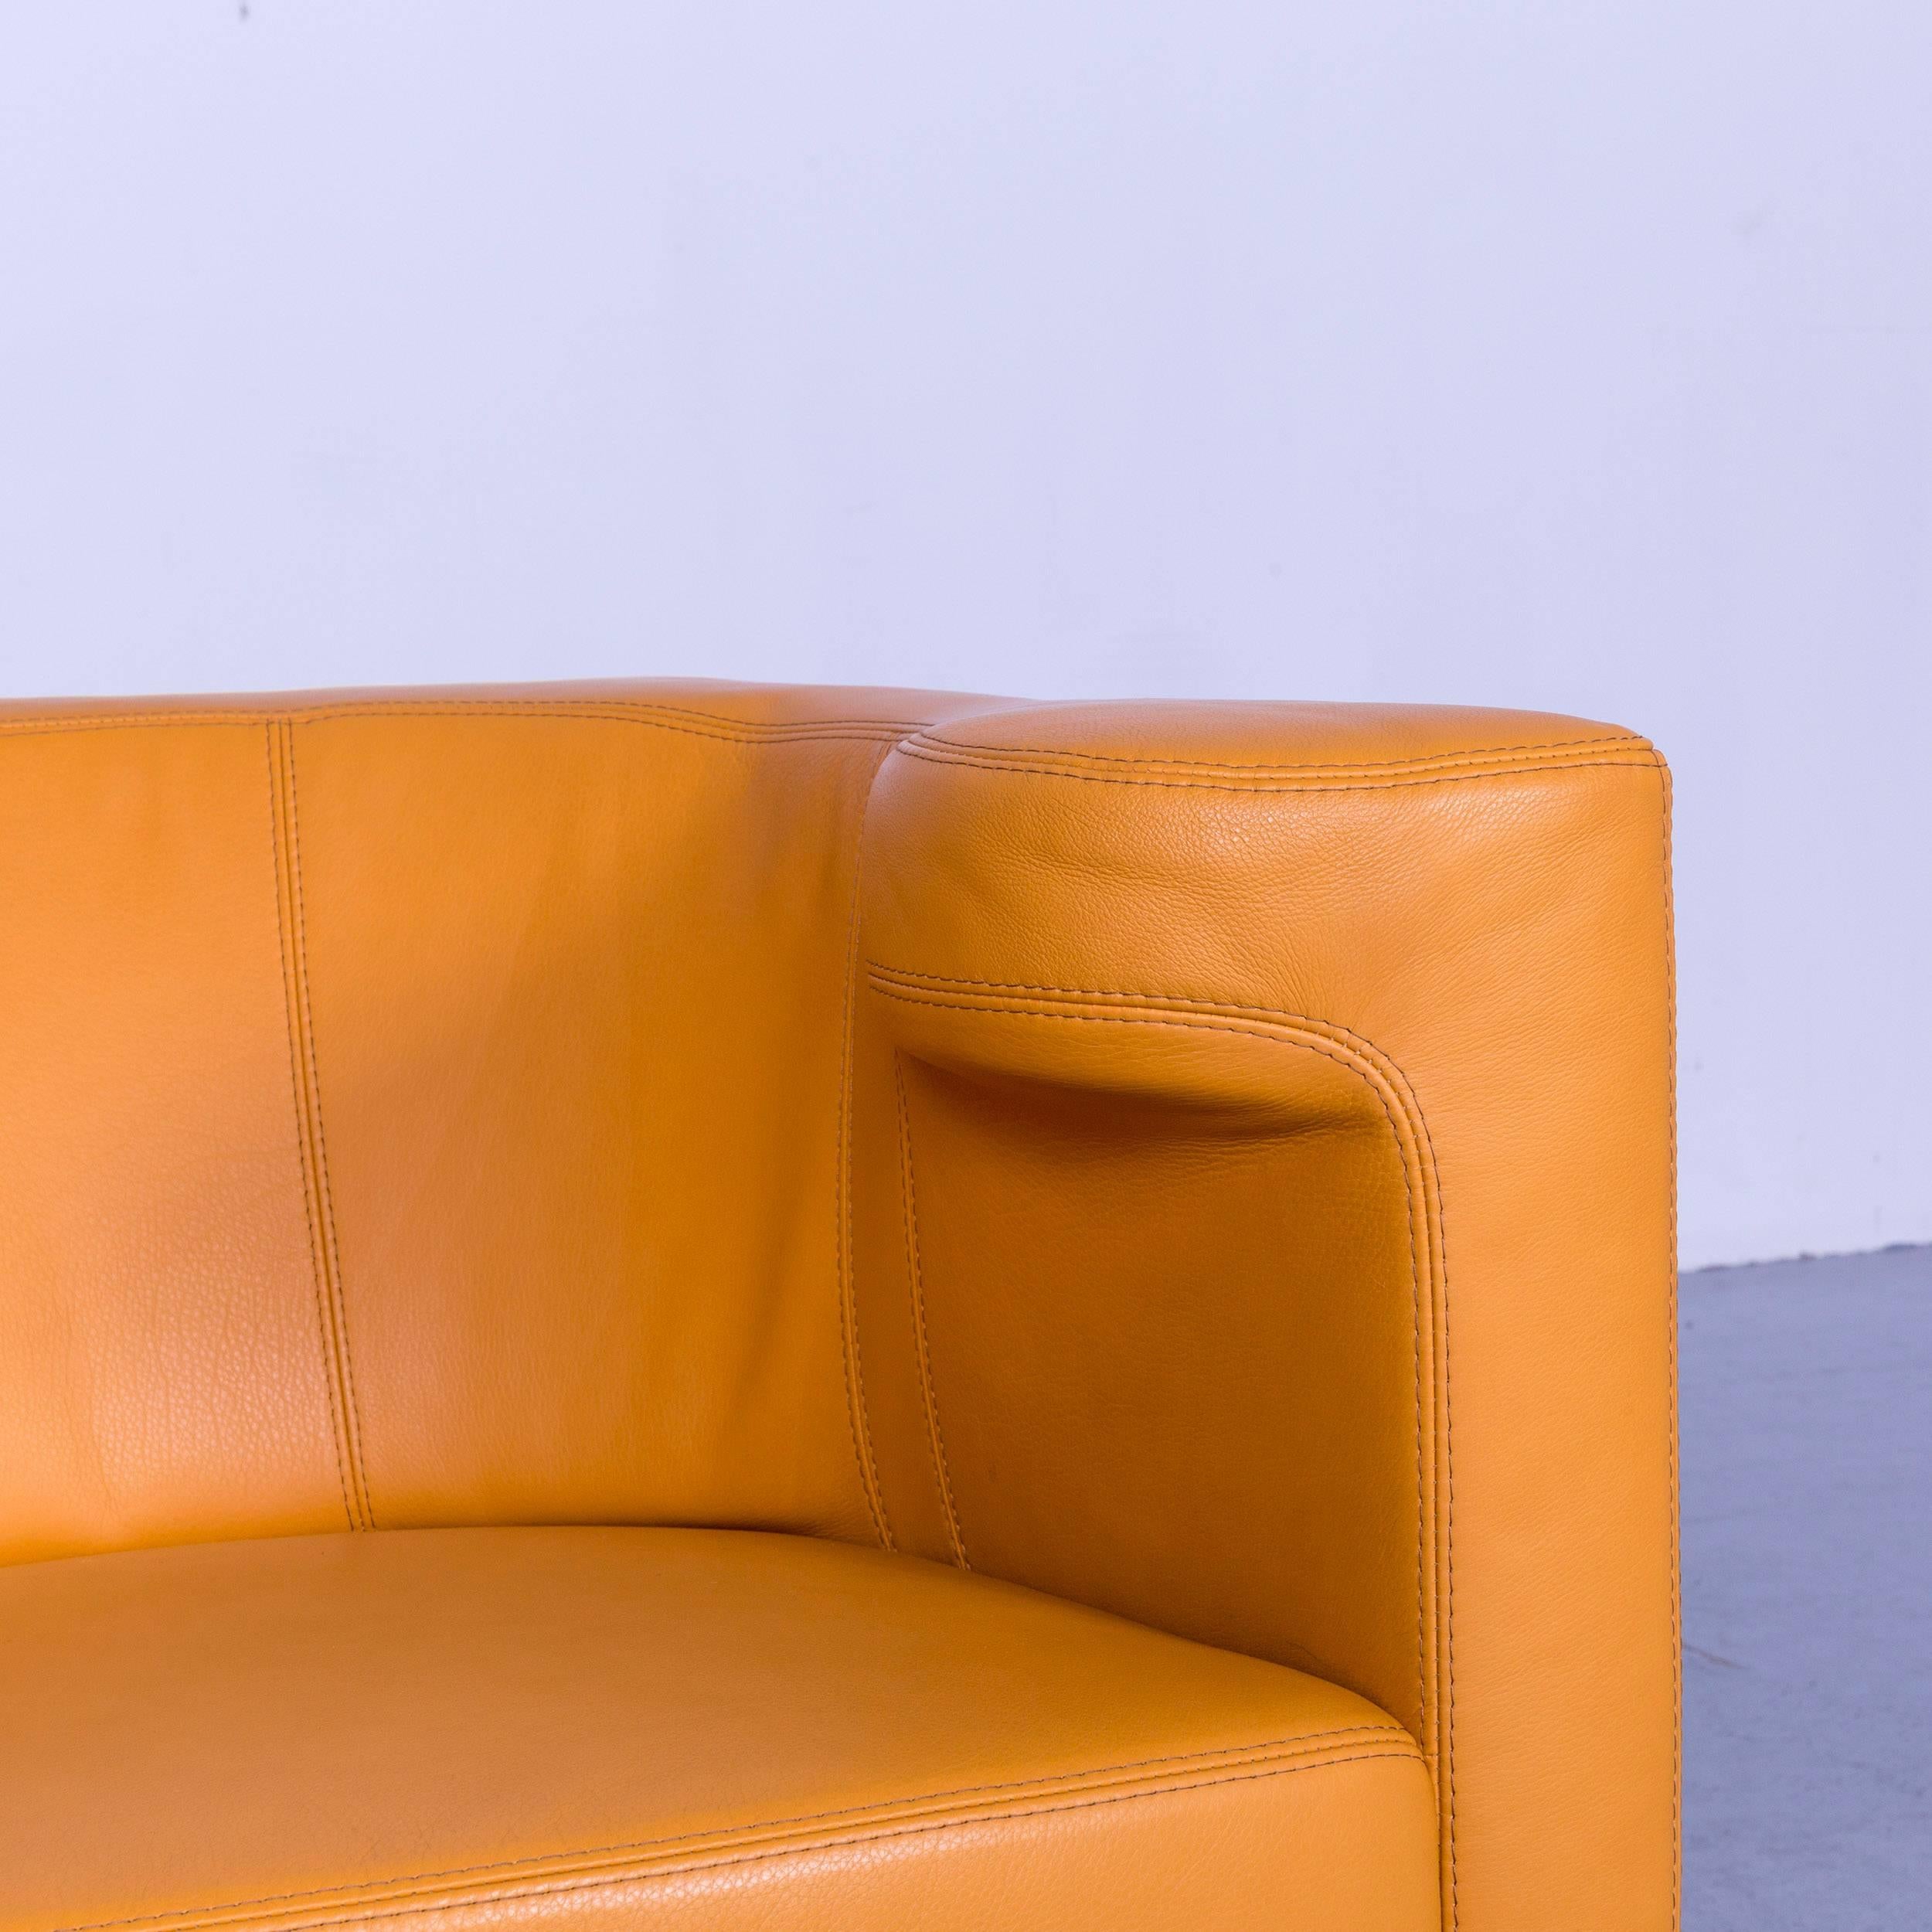 Contemporary Willy Schillig Leather Armchair Orange-Yellow One-Seat